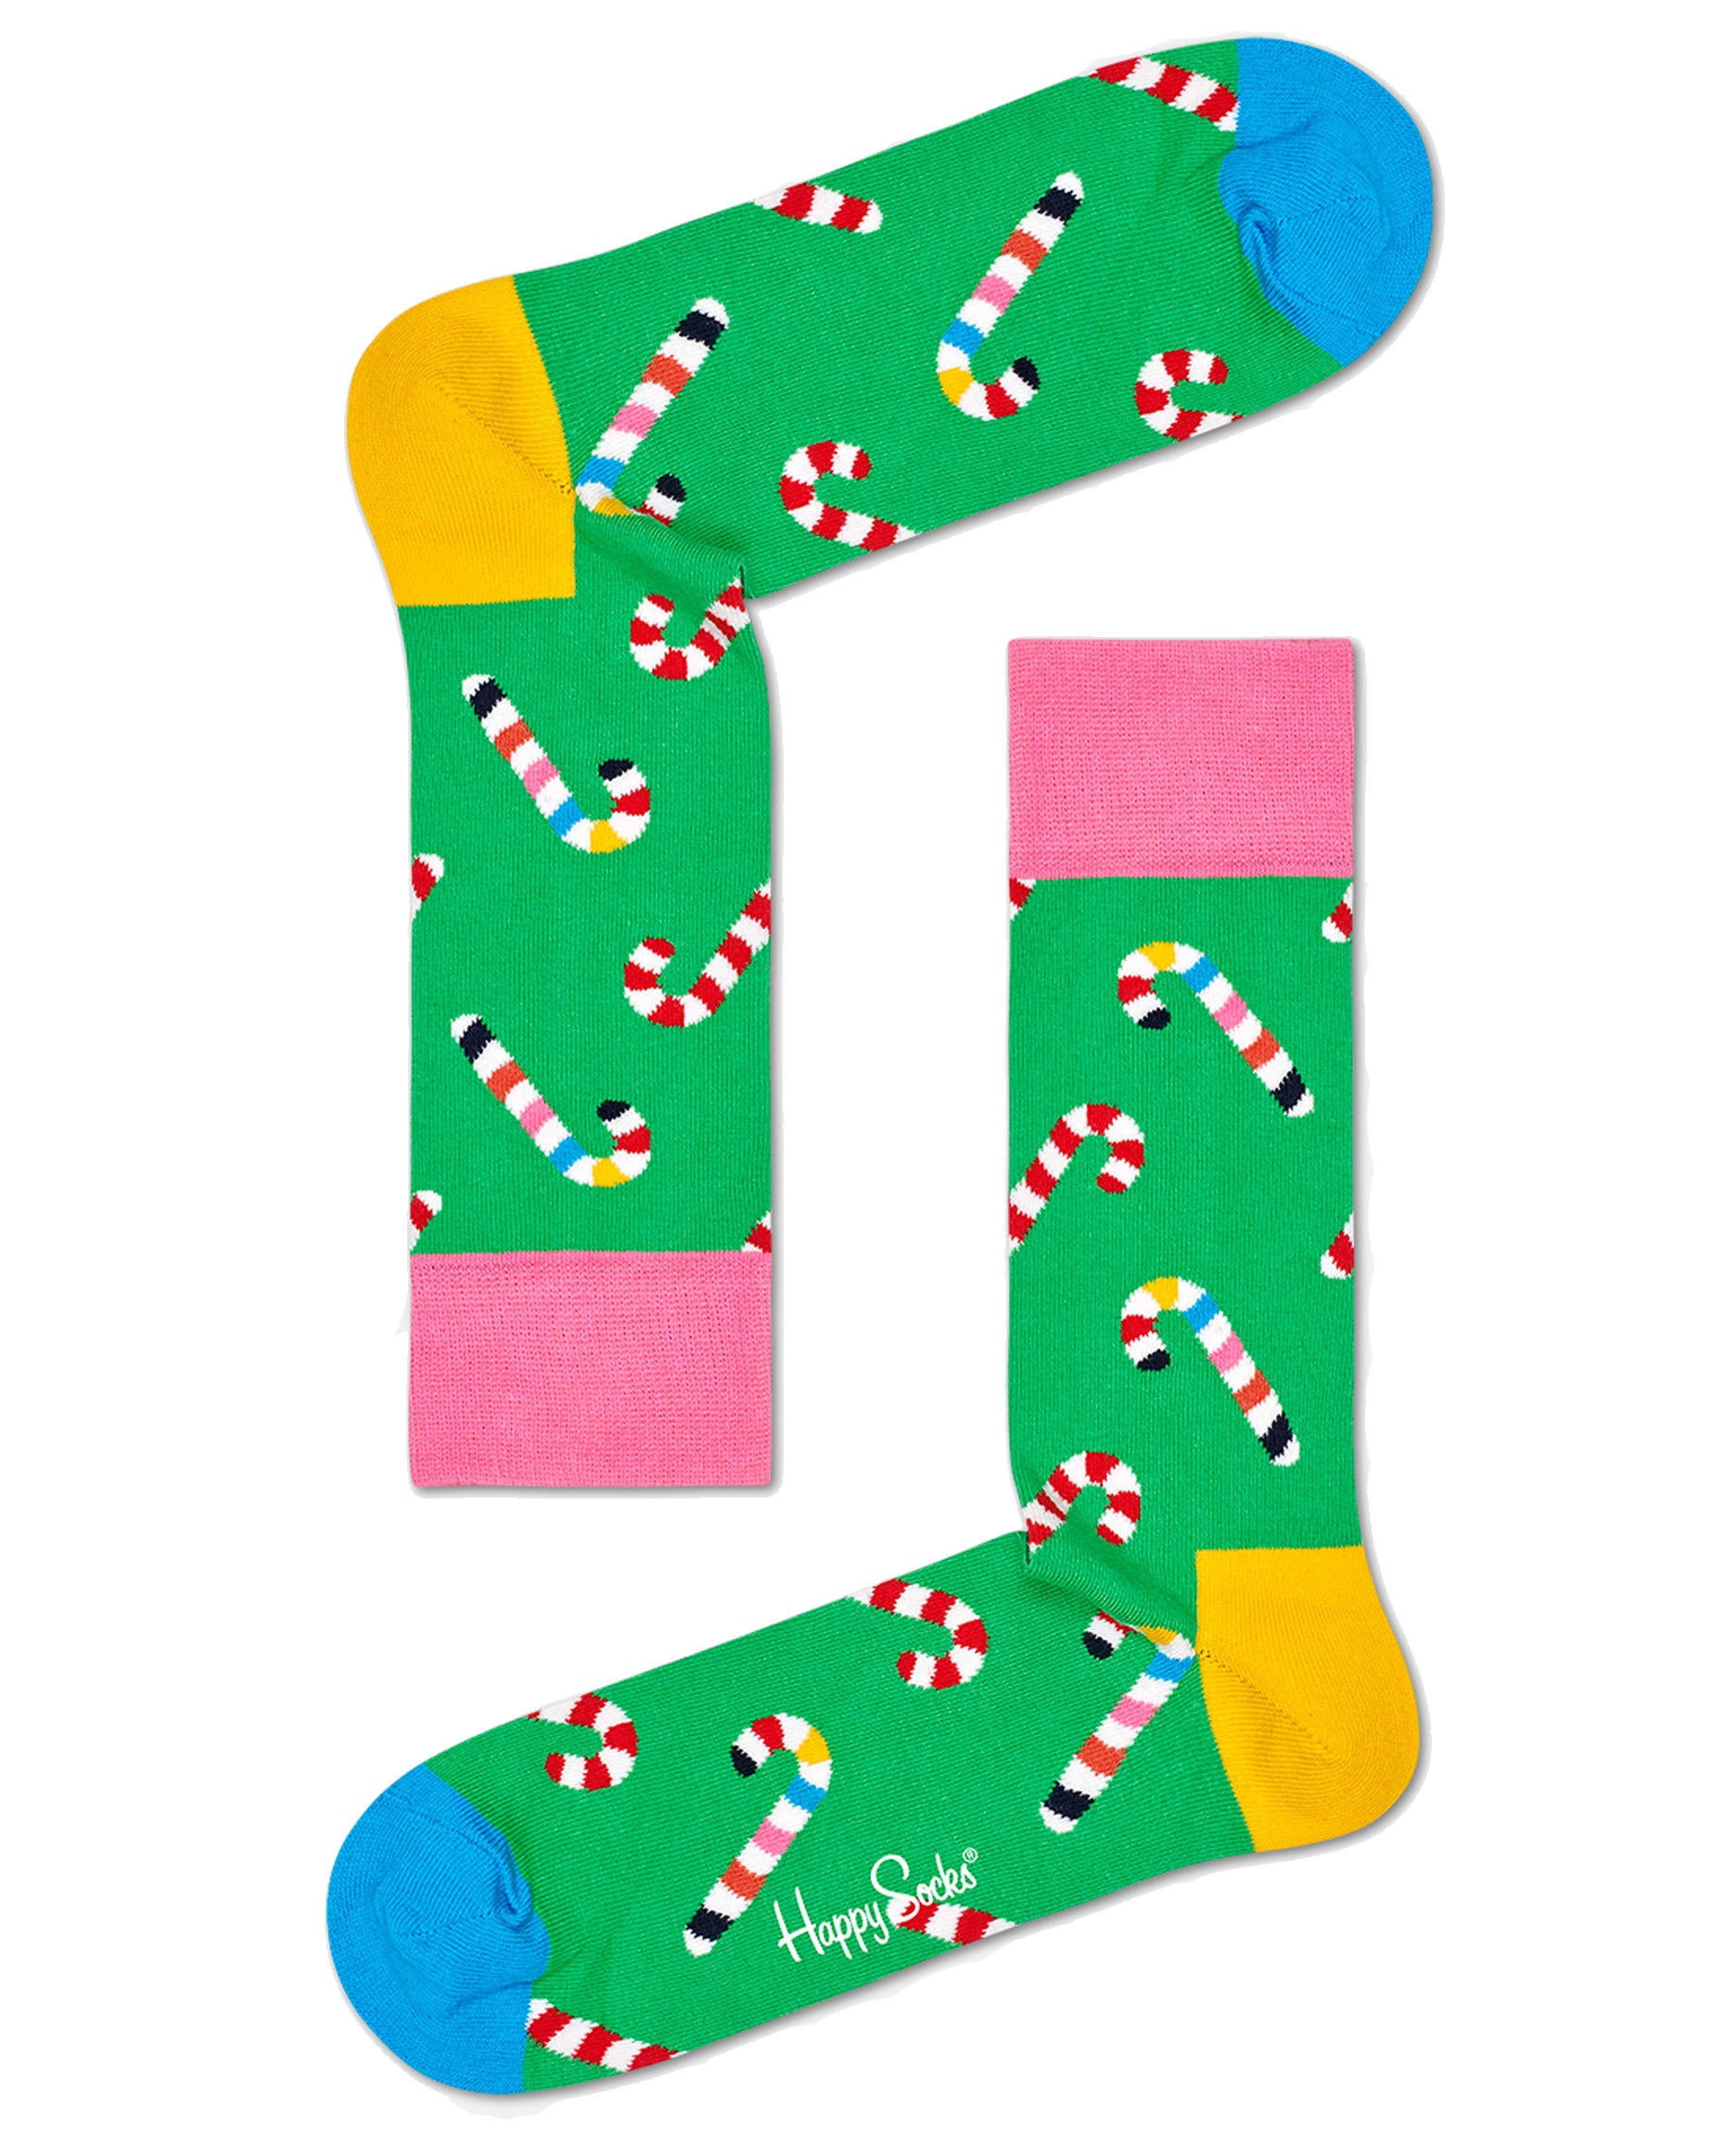 Happy Socks XCCA02-0100 Psychedelic Candy Cane Socks Gift Box - Green cotton socks with multicoloured candy cane pattern, pink cuff, yellow heel and blue toe. 